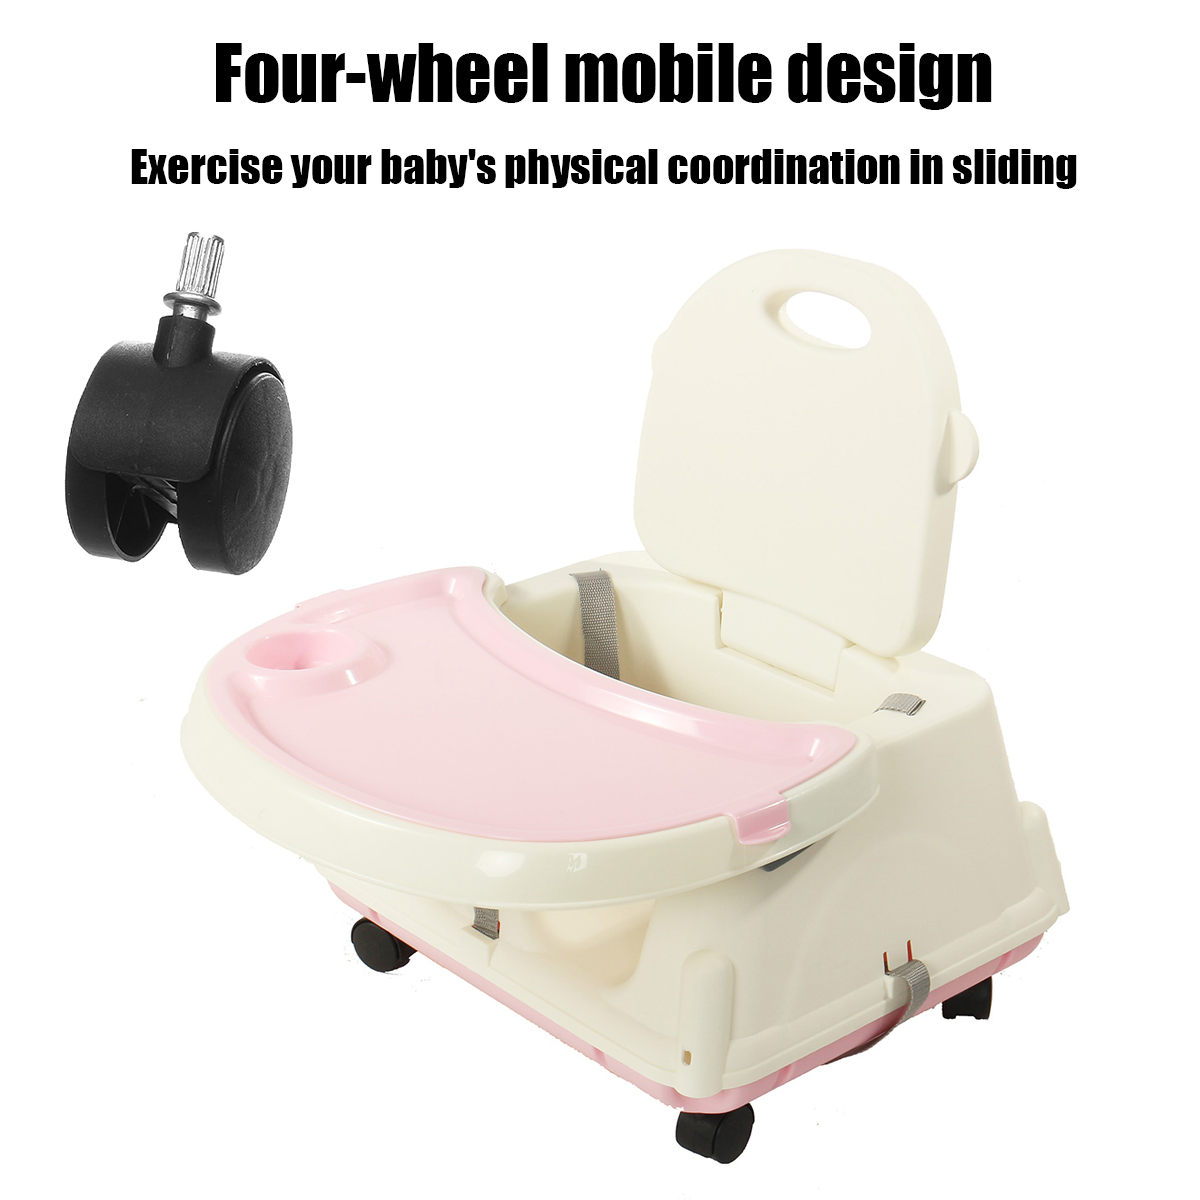 KUDOSALE-3-in-1-Adjustable-Baby-High-Chair-Table-Convertible-Play-Seat-Booster-Toddler-Feeding-with--1749429-4